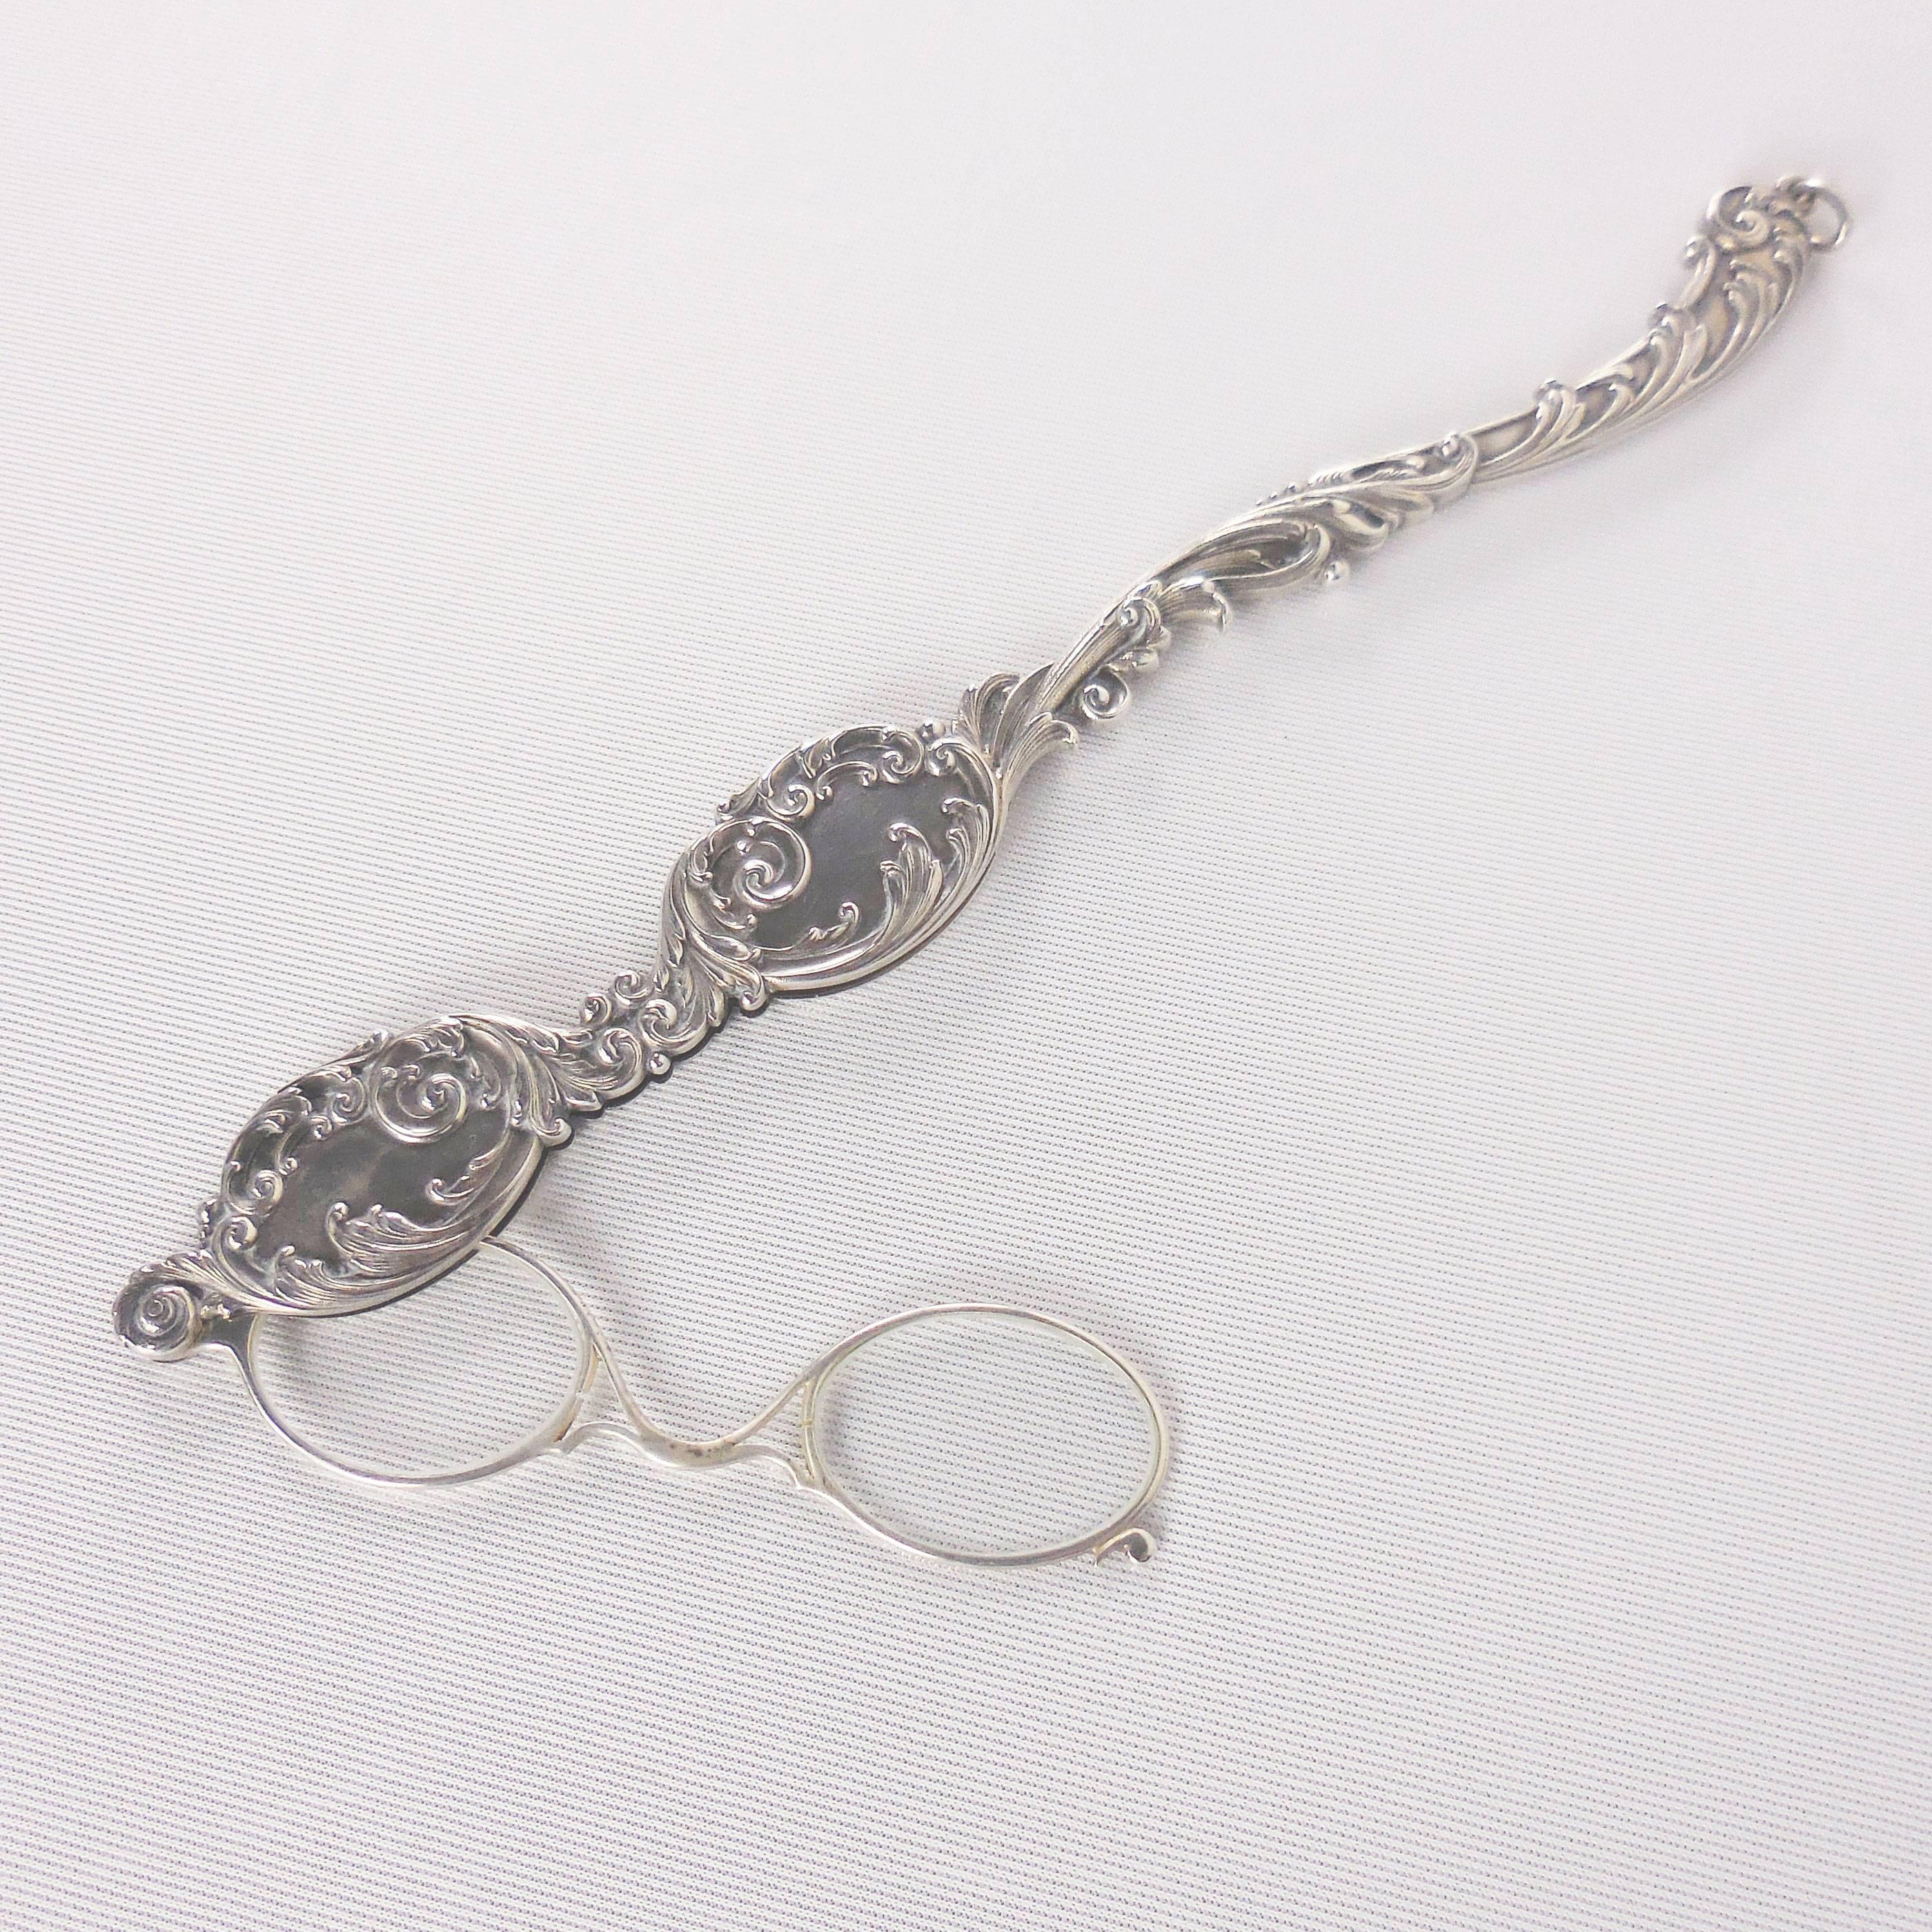 Long ornate sterling siver Art Nouveau retractable Lorgnette pendant featuring ornate repoussé volute decorations on the handle. Hand-crafted with exceptional workmanship.
Approximate total weight= 54.4grams. Circa 1900.